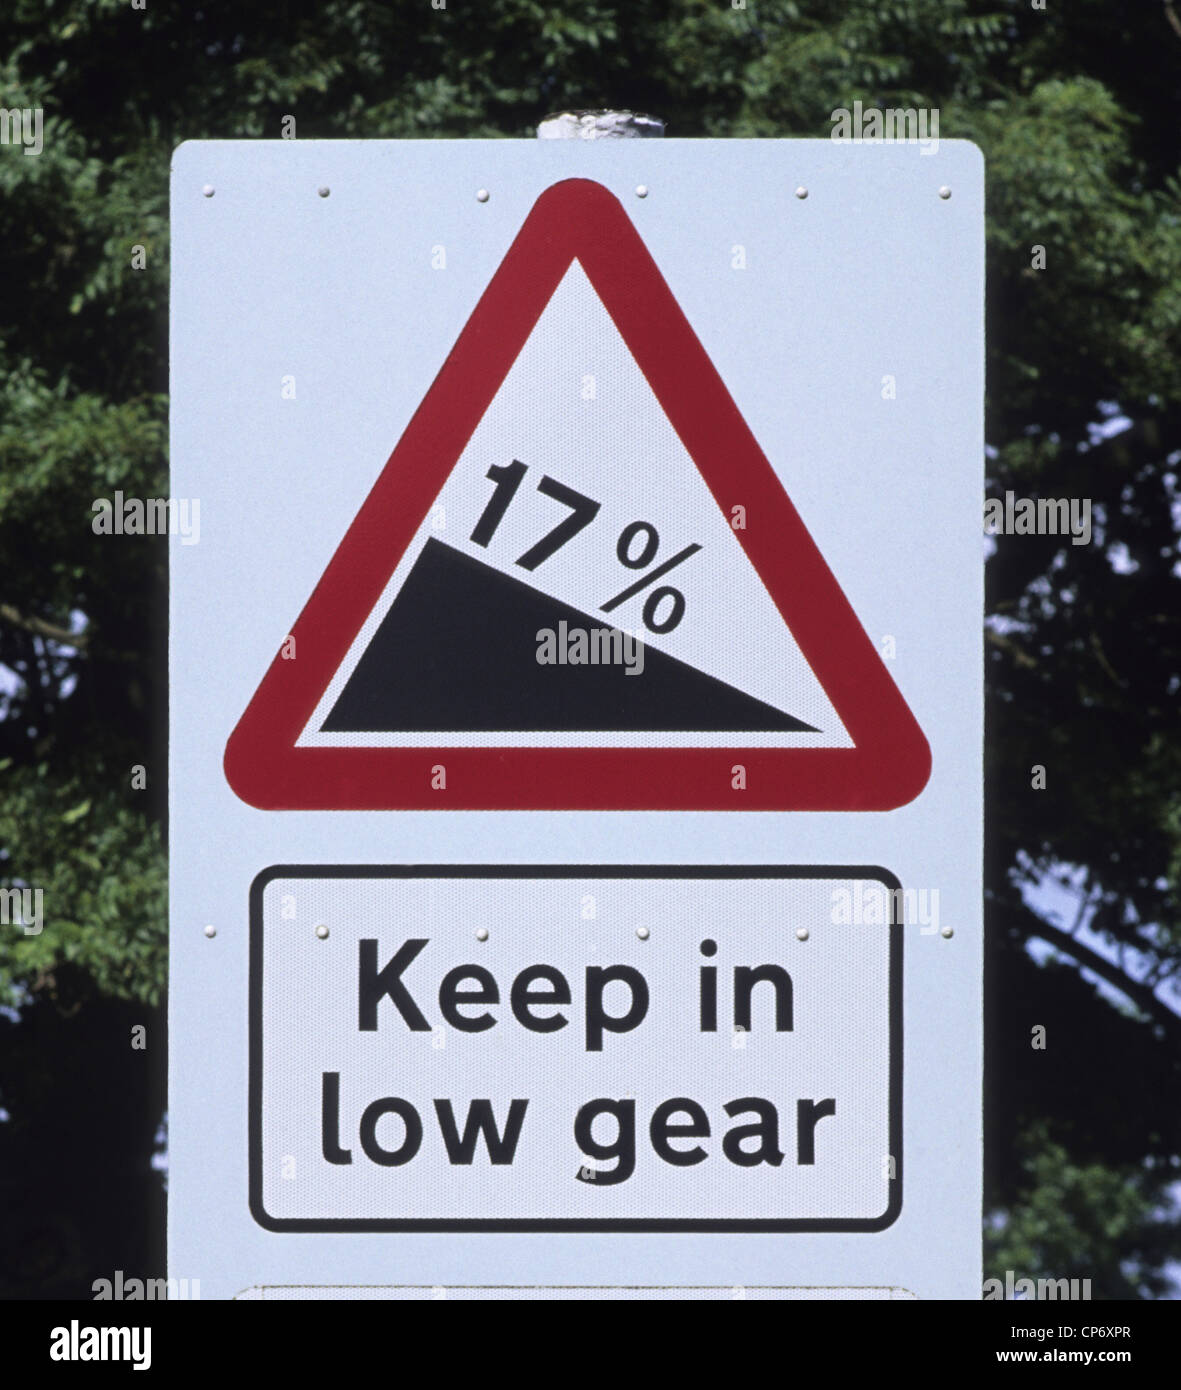 safety warning sign on steep hill for vehicles to keep in low gear at staxton scarborough yorkshire uk Stock Photo